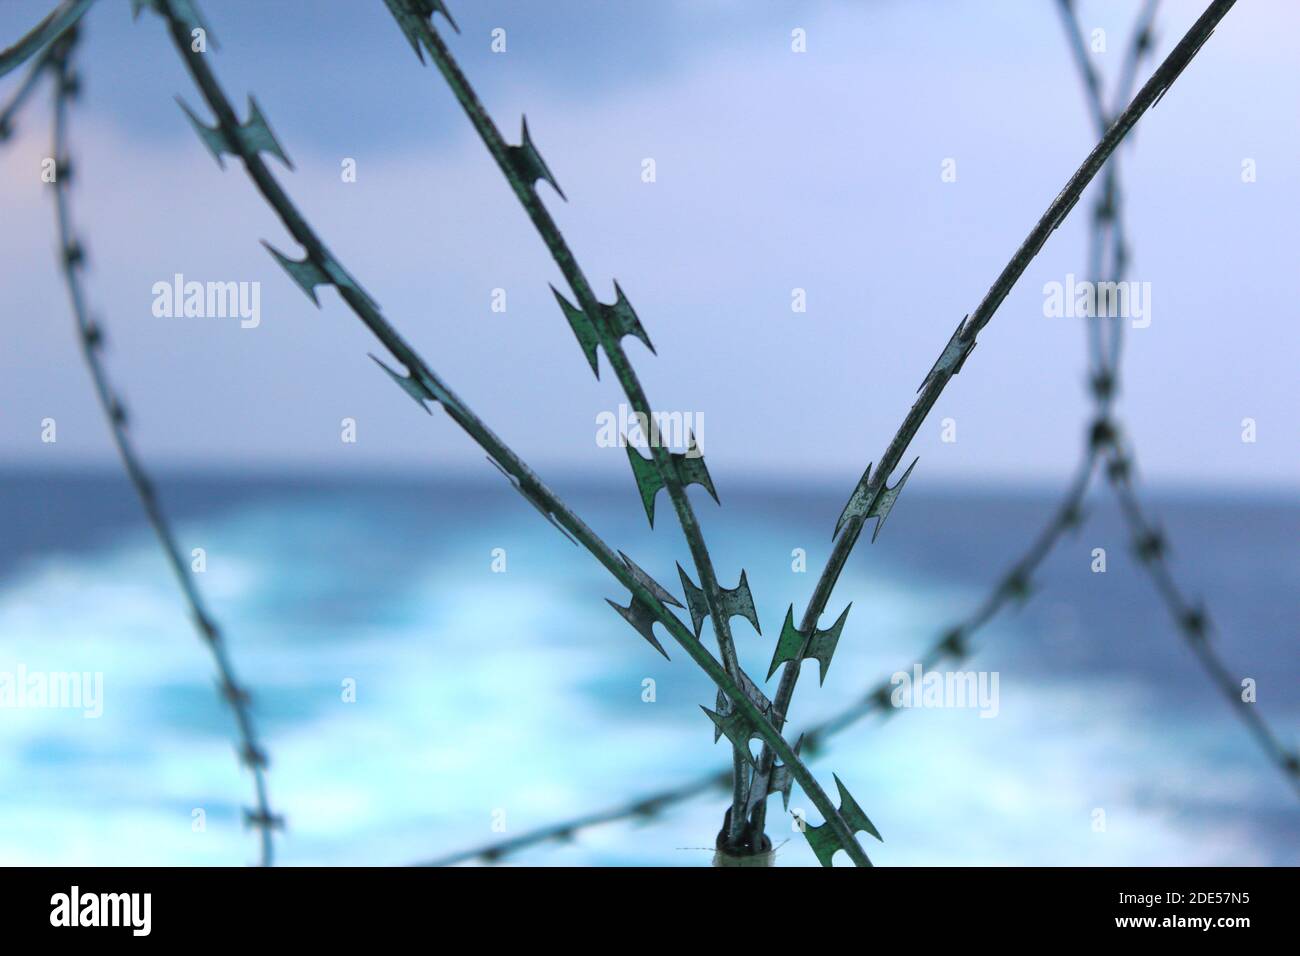 Close up shot of NATO razor wire on a ship with a blurred ship wake and blue ocean in the background. Stock Photo